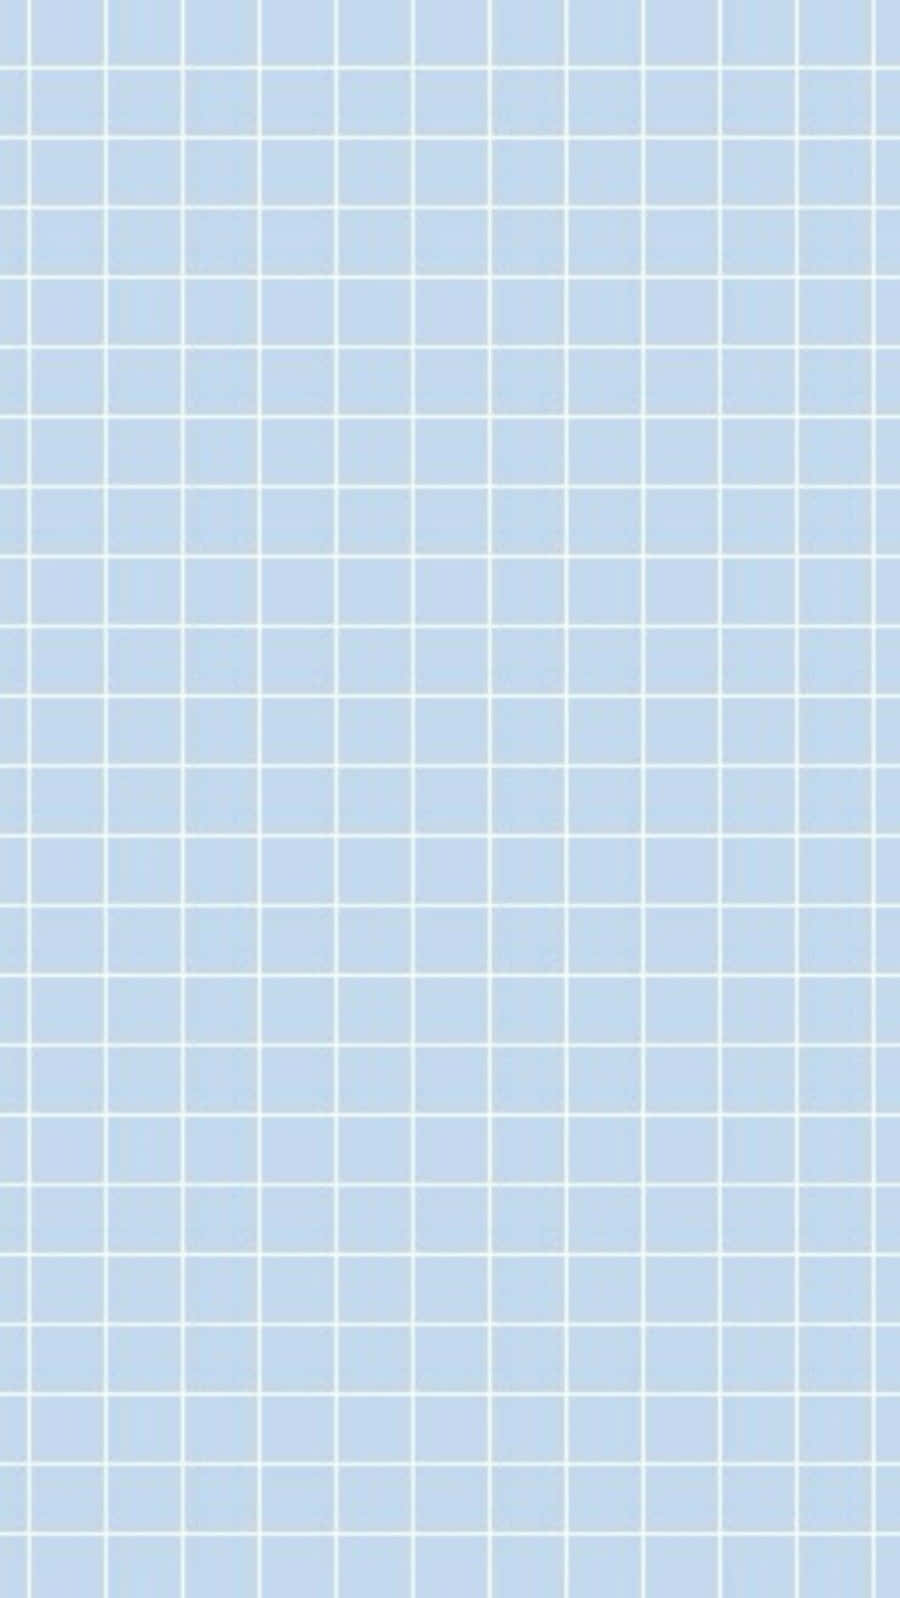 Awesome pastel aesthetic grid design Wallpaper